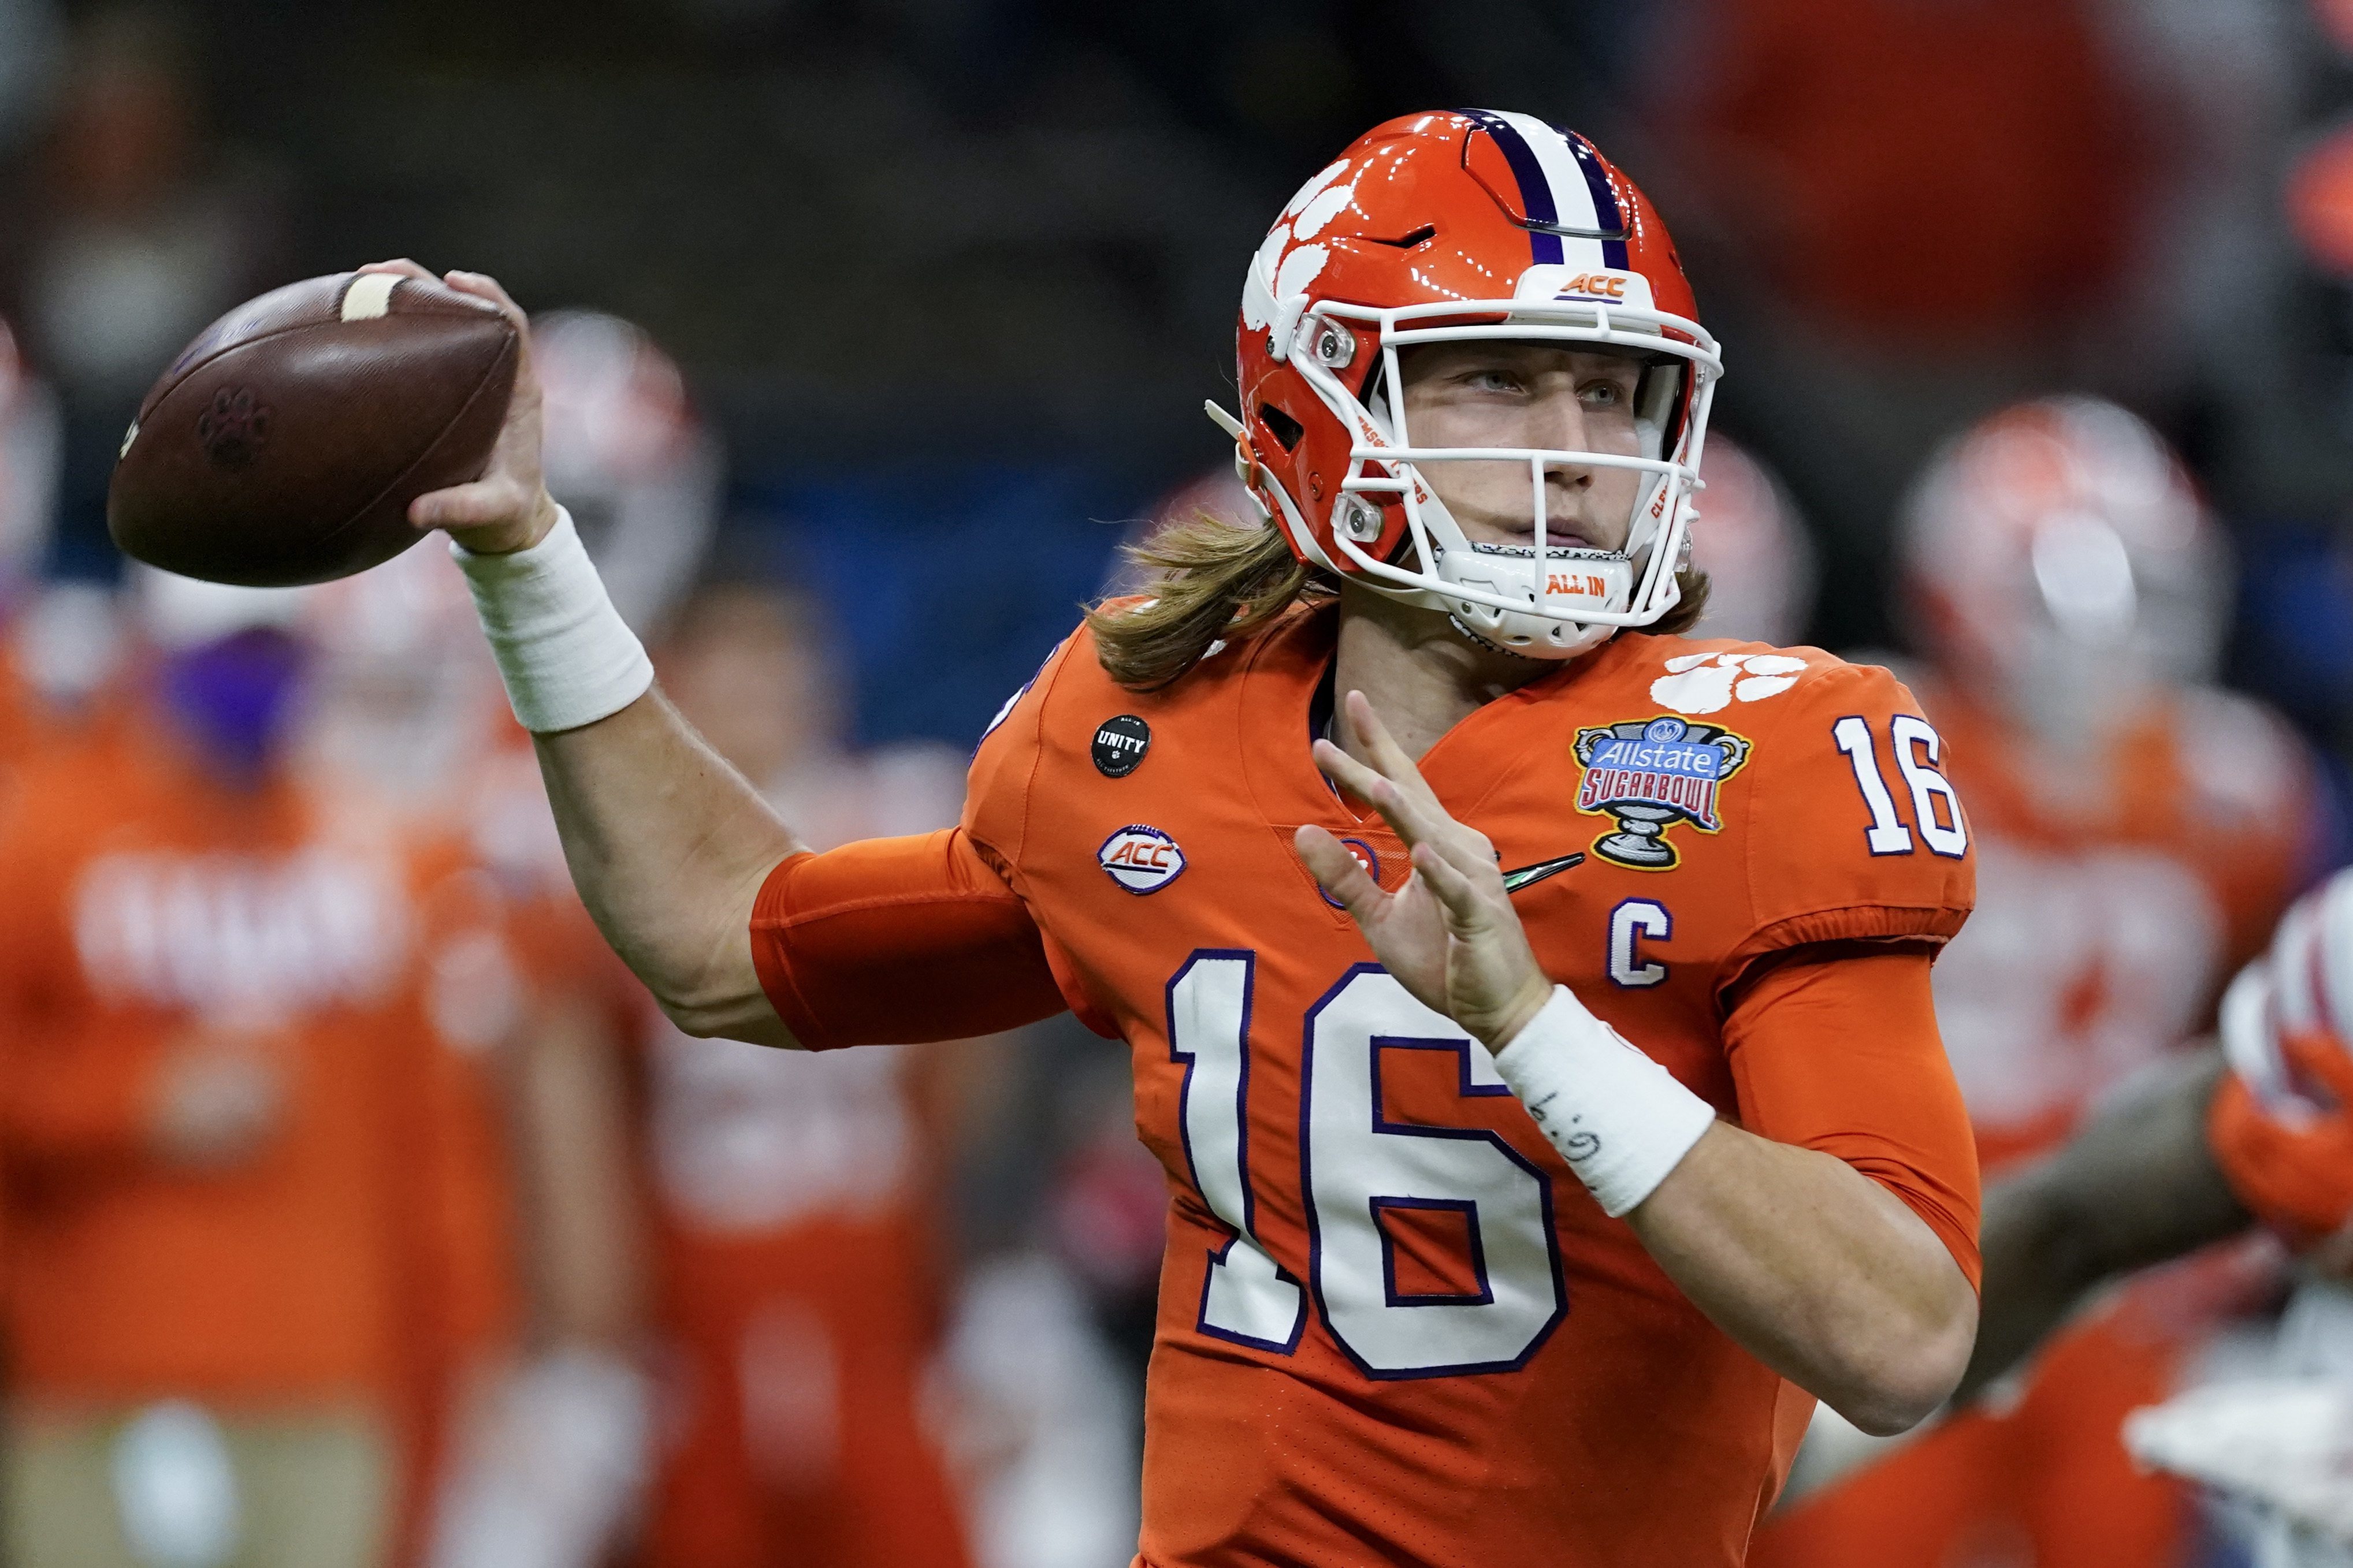 2021 NFL Mock Draft: Clemson's Trevor Lawrence goes No. 1 overall to the  Jaguars, Jets take BYU's Zach Wilson at No. 2, NFL Draft